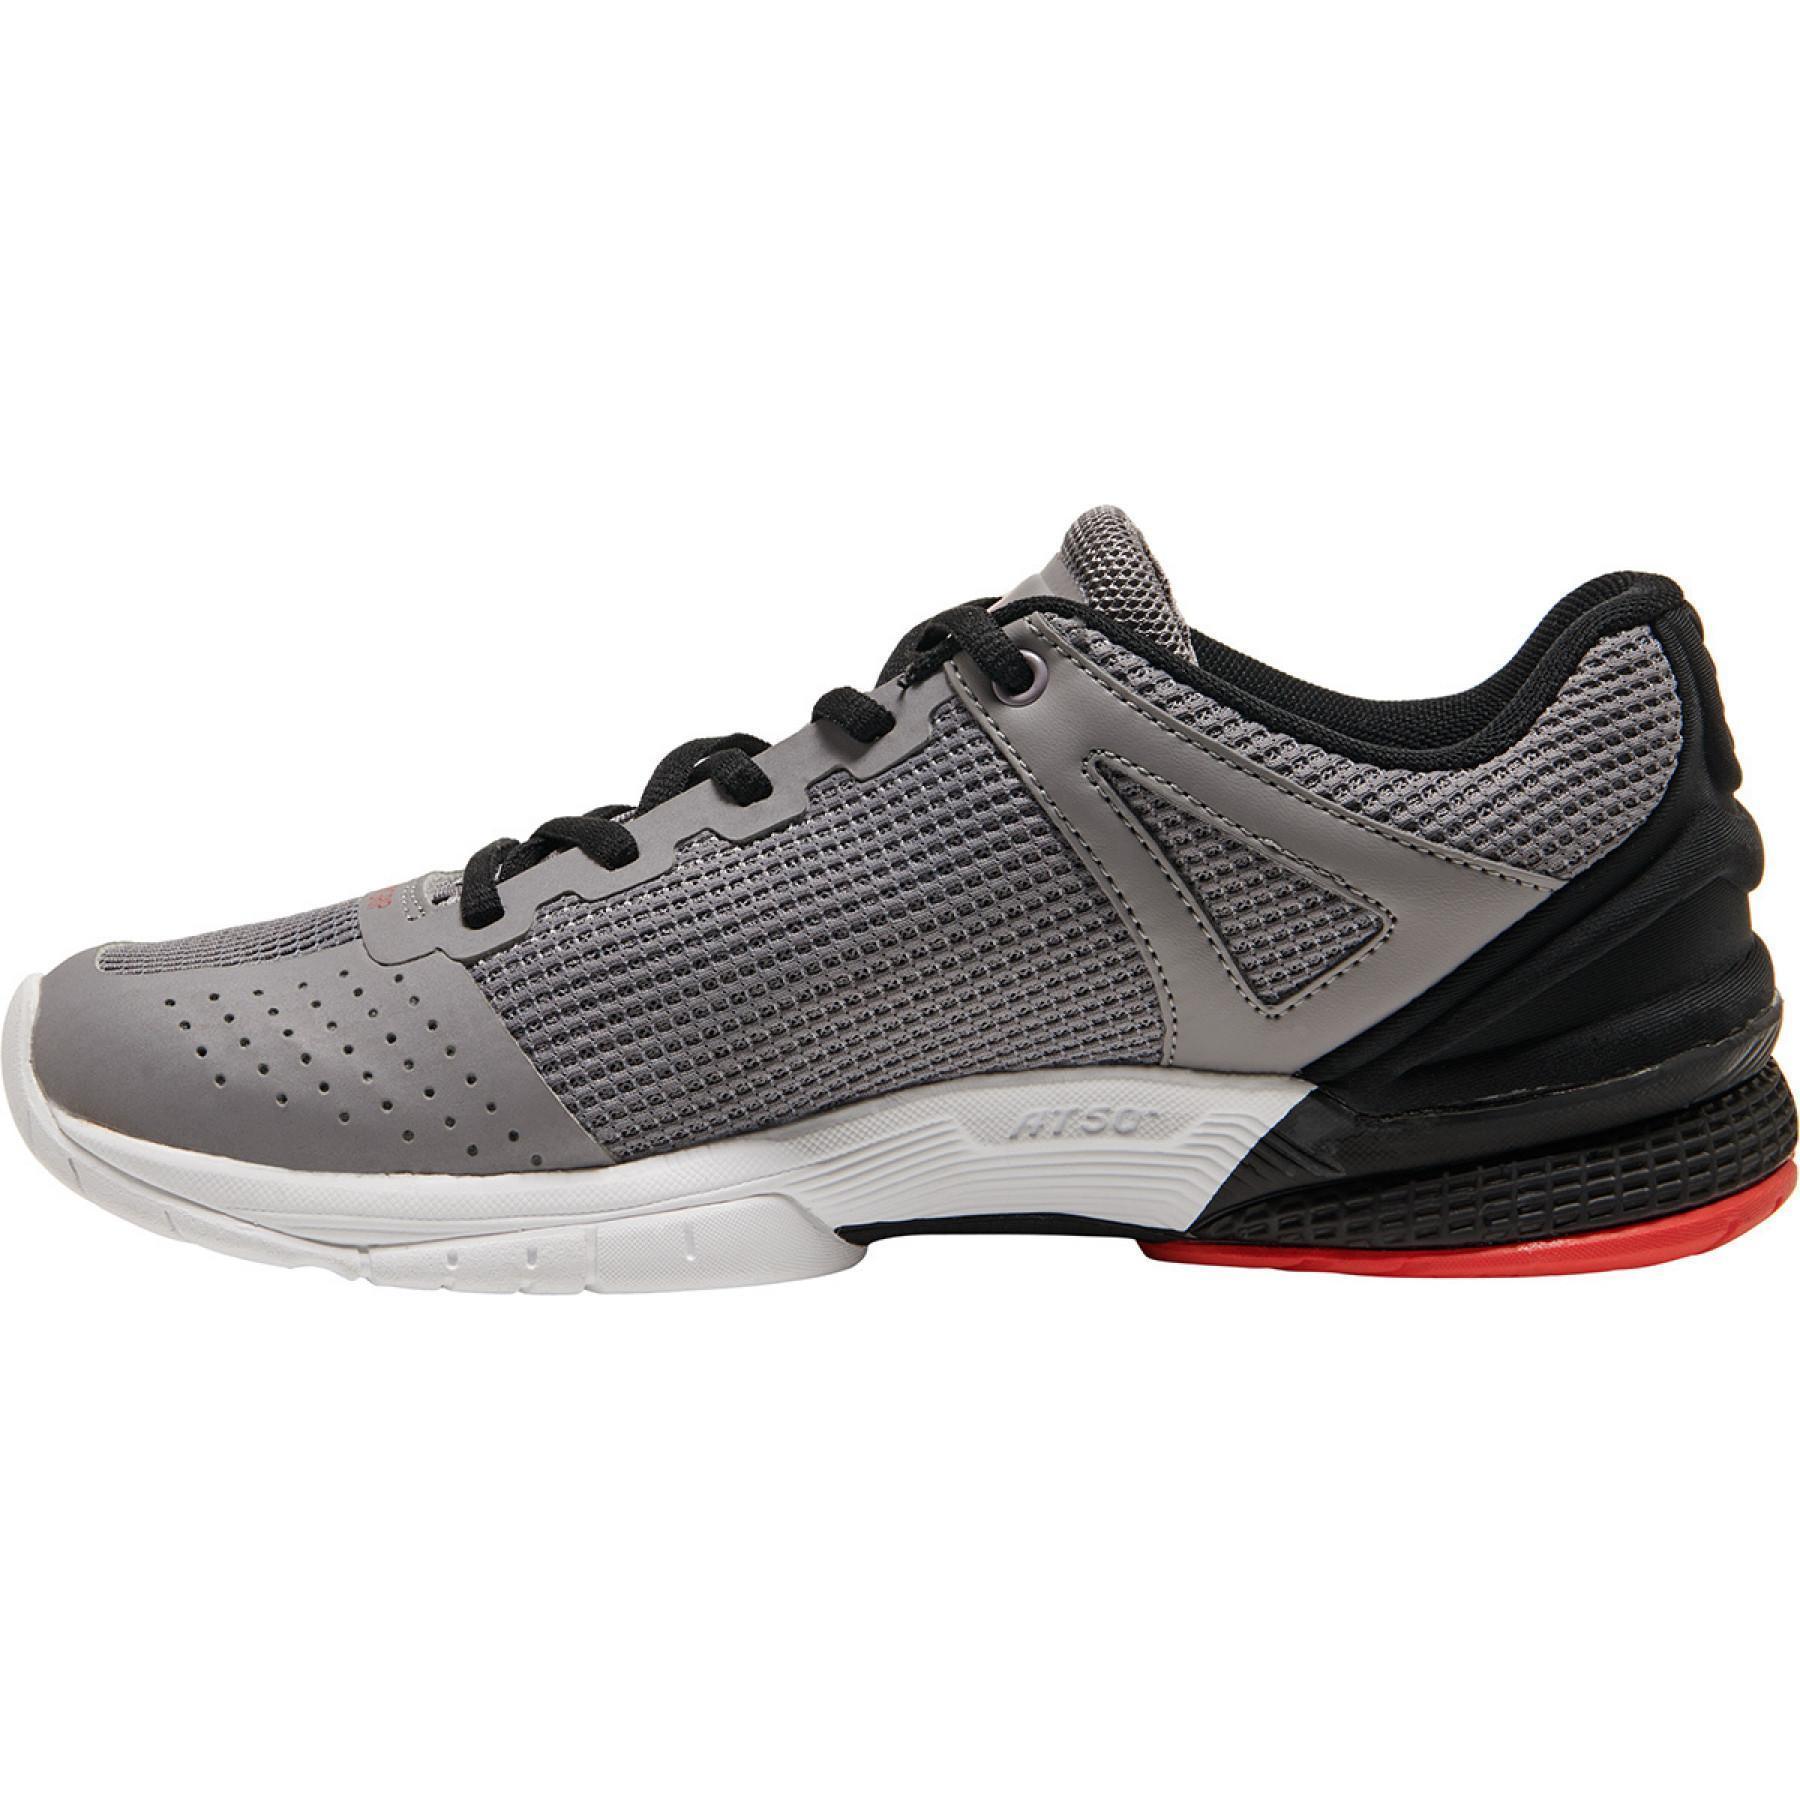 Chaussures Hummel Aerocharge Hb180 Rely 3.0 Trophy